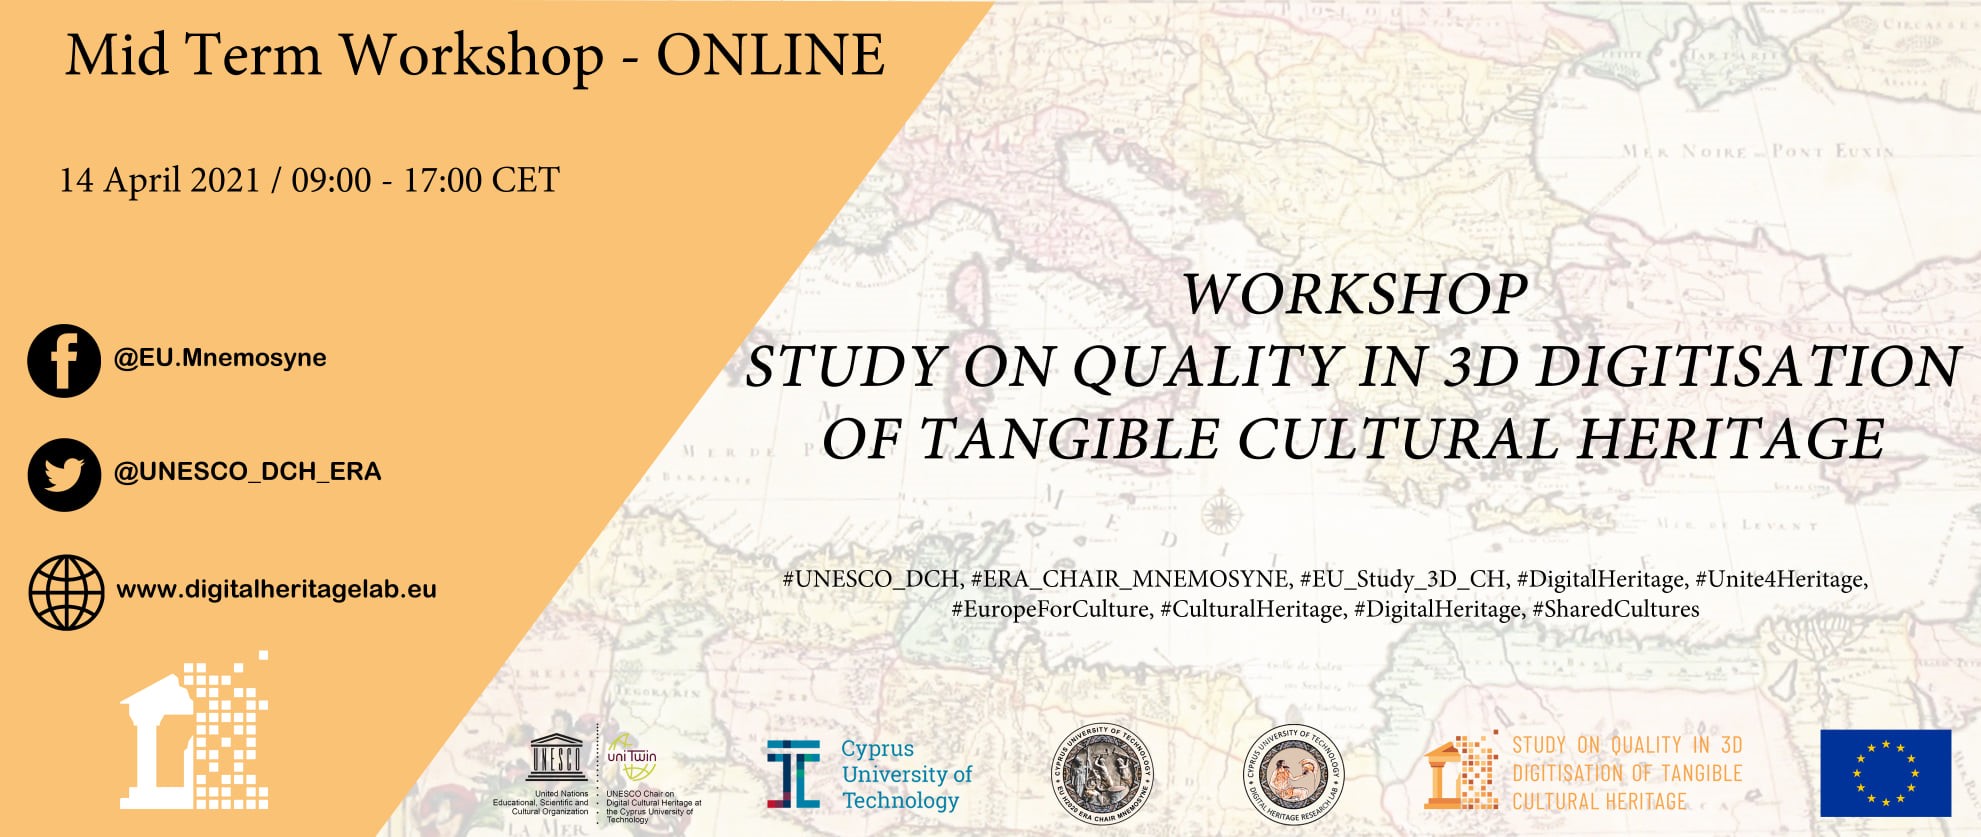 Joint Workshop for the Quality in 3D Digitisation of Tangible Cultural Heritage